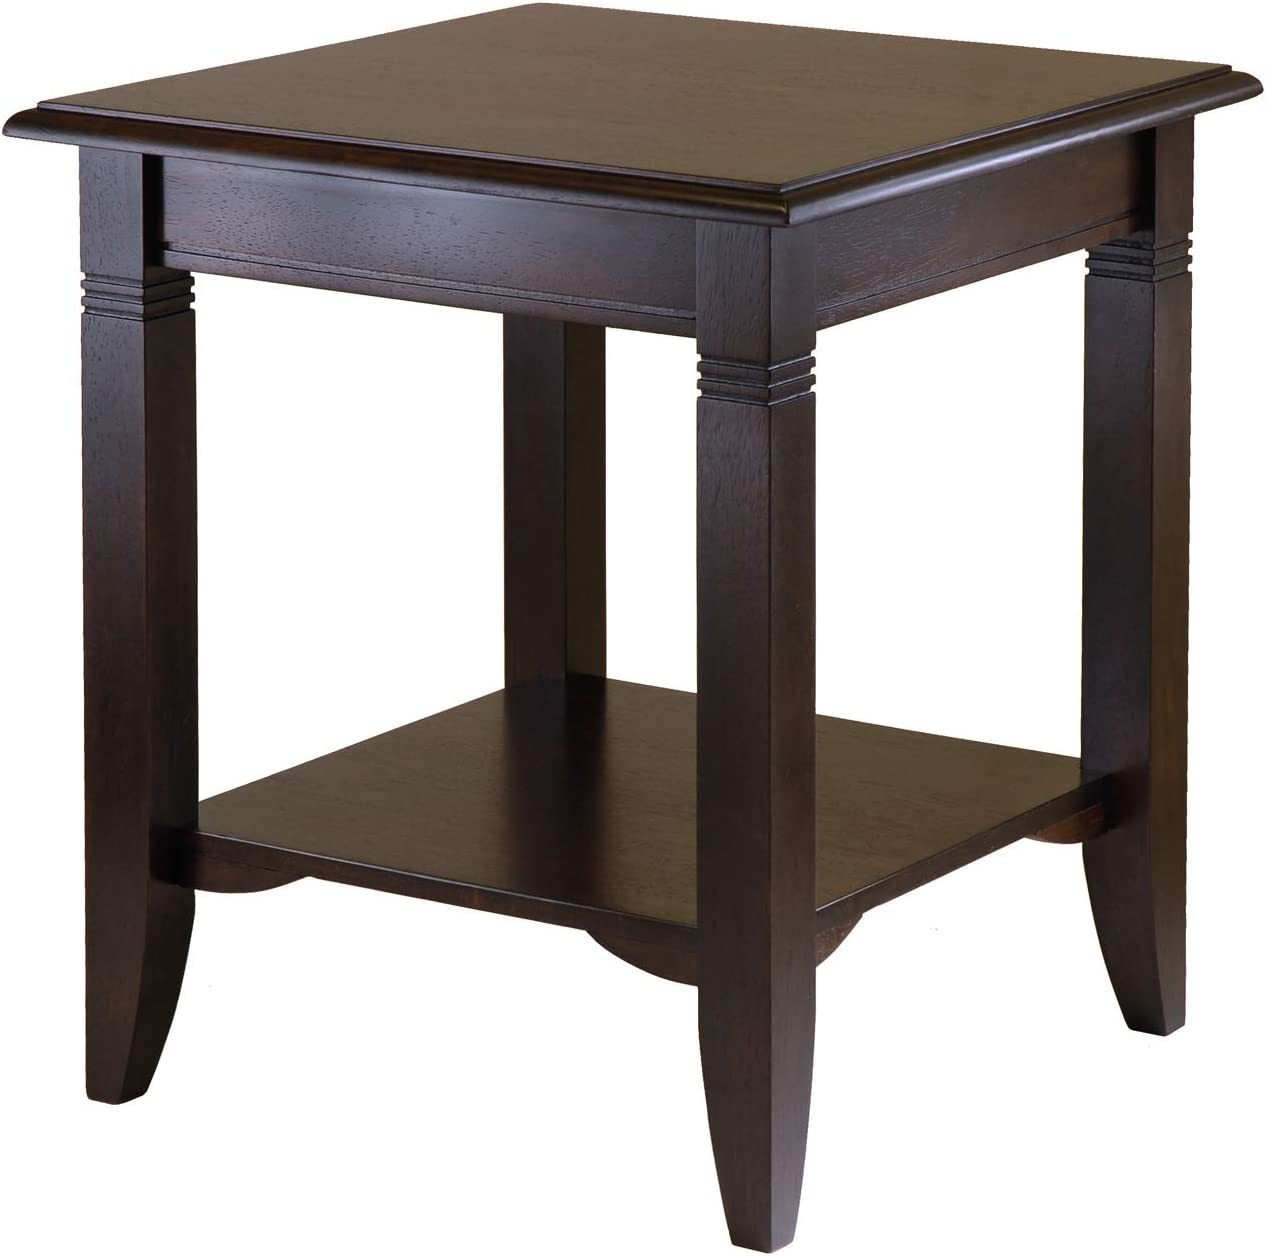 Primary image for Winsome Wood Nolan Occasional Table, Cappuccino